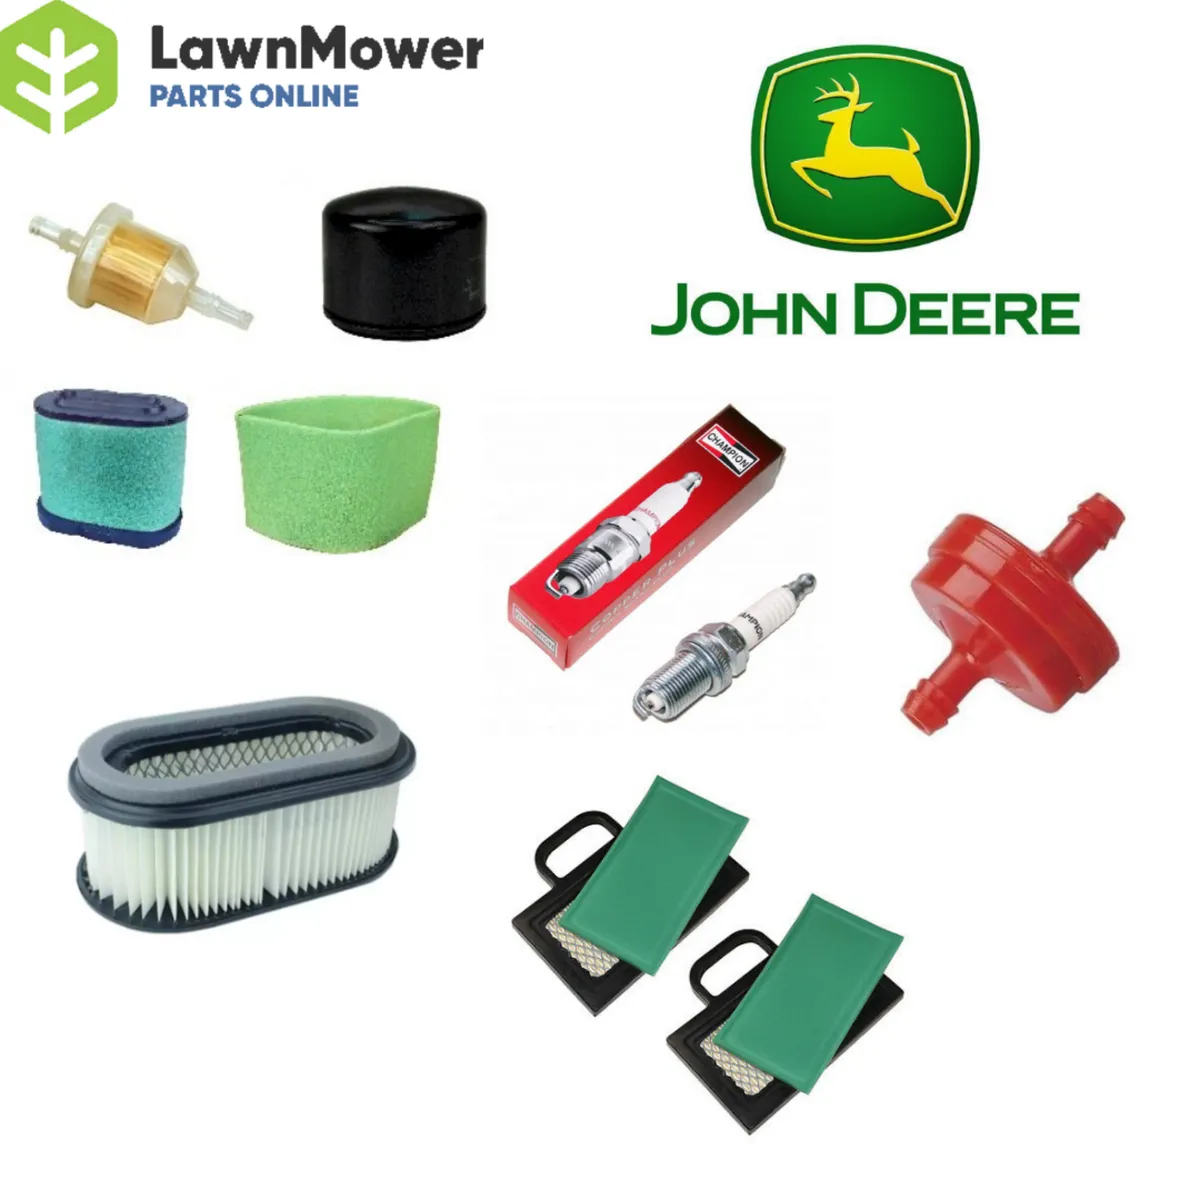 John Deere Service Kits for Mowers-FREE DELIVERY